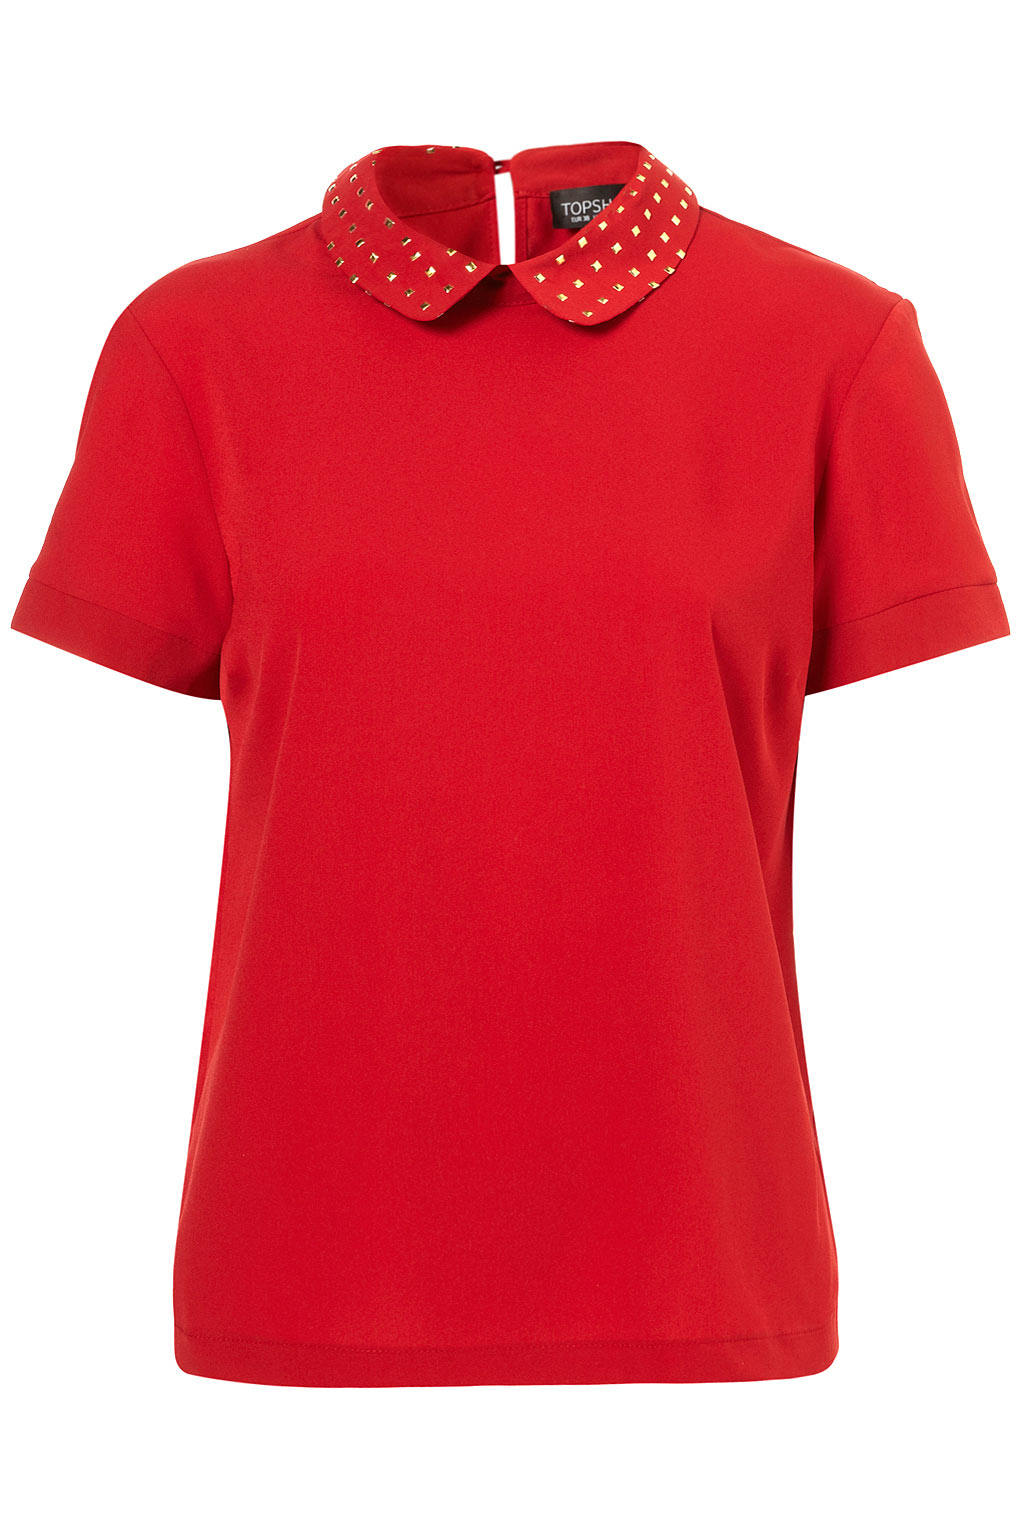 Lyst - Topshop Gold Trim Collar Blouse in Red